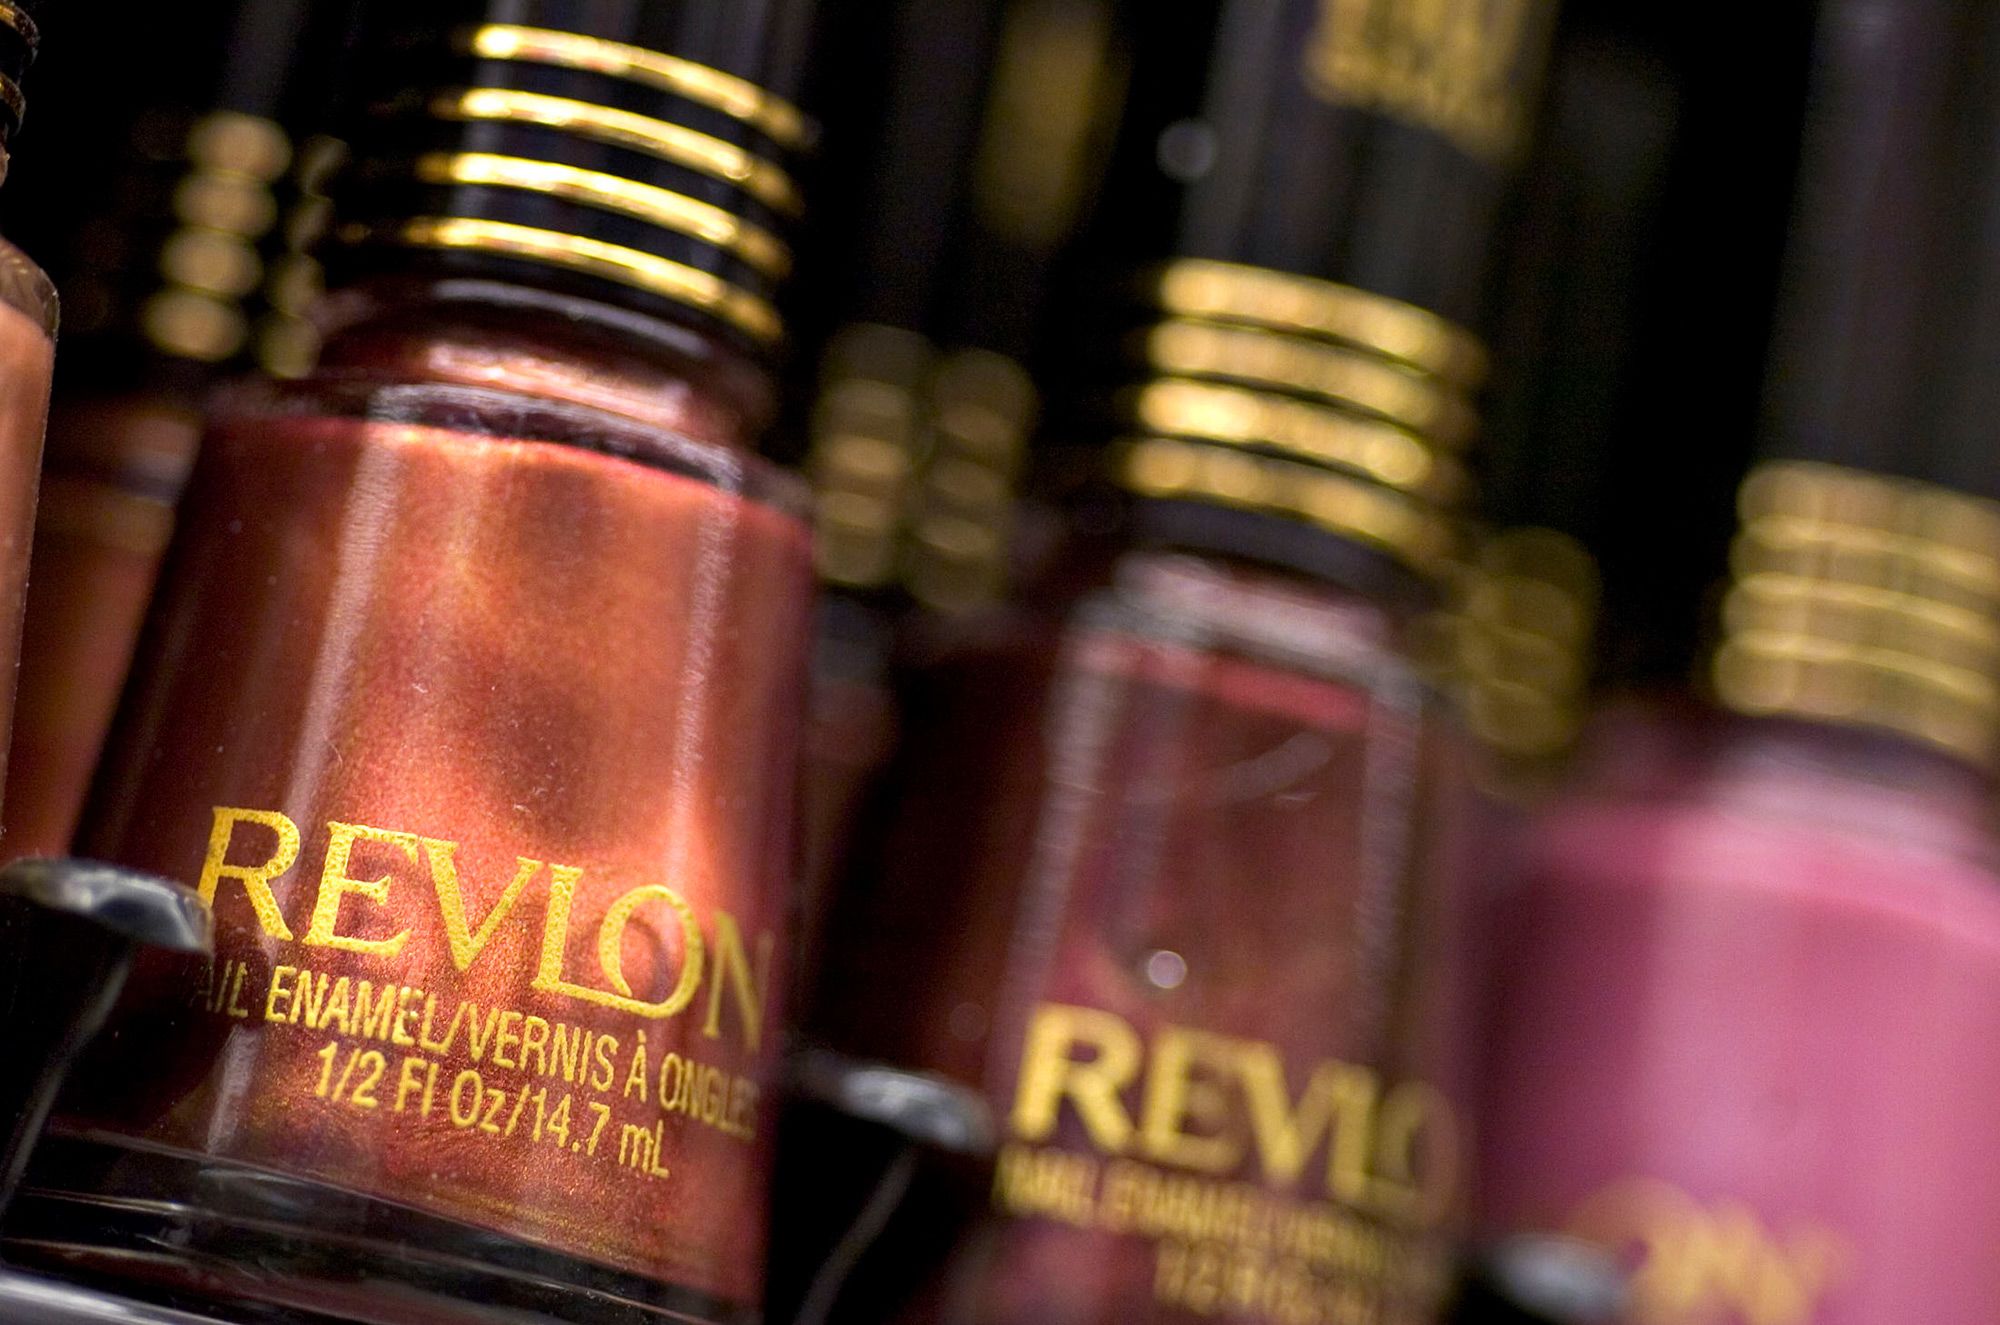 Revlon stock jumps on report it is considering a sale